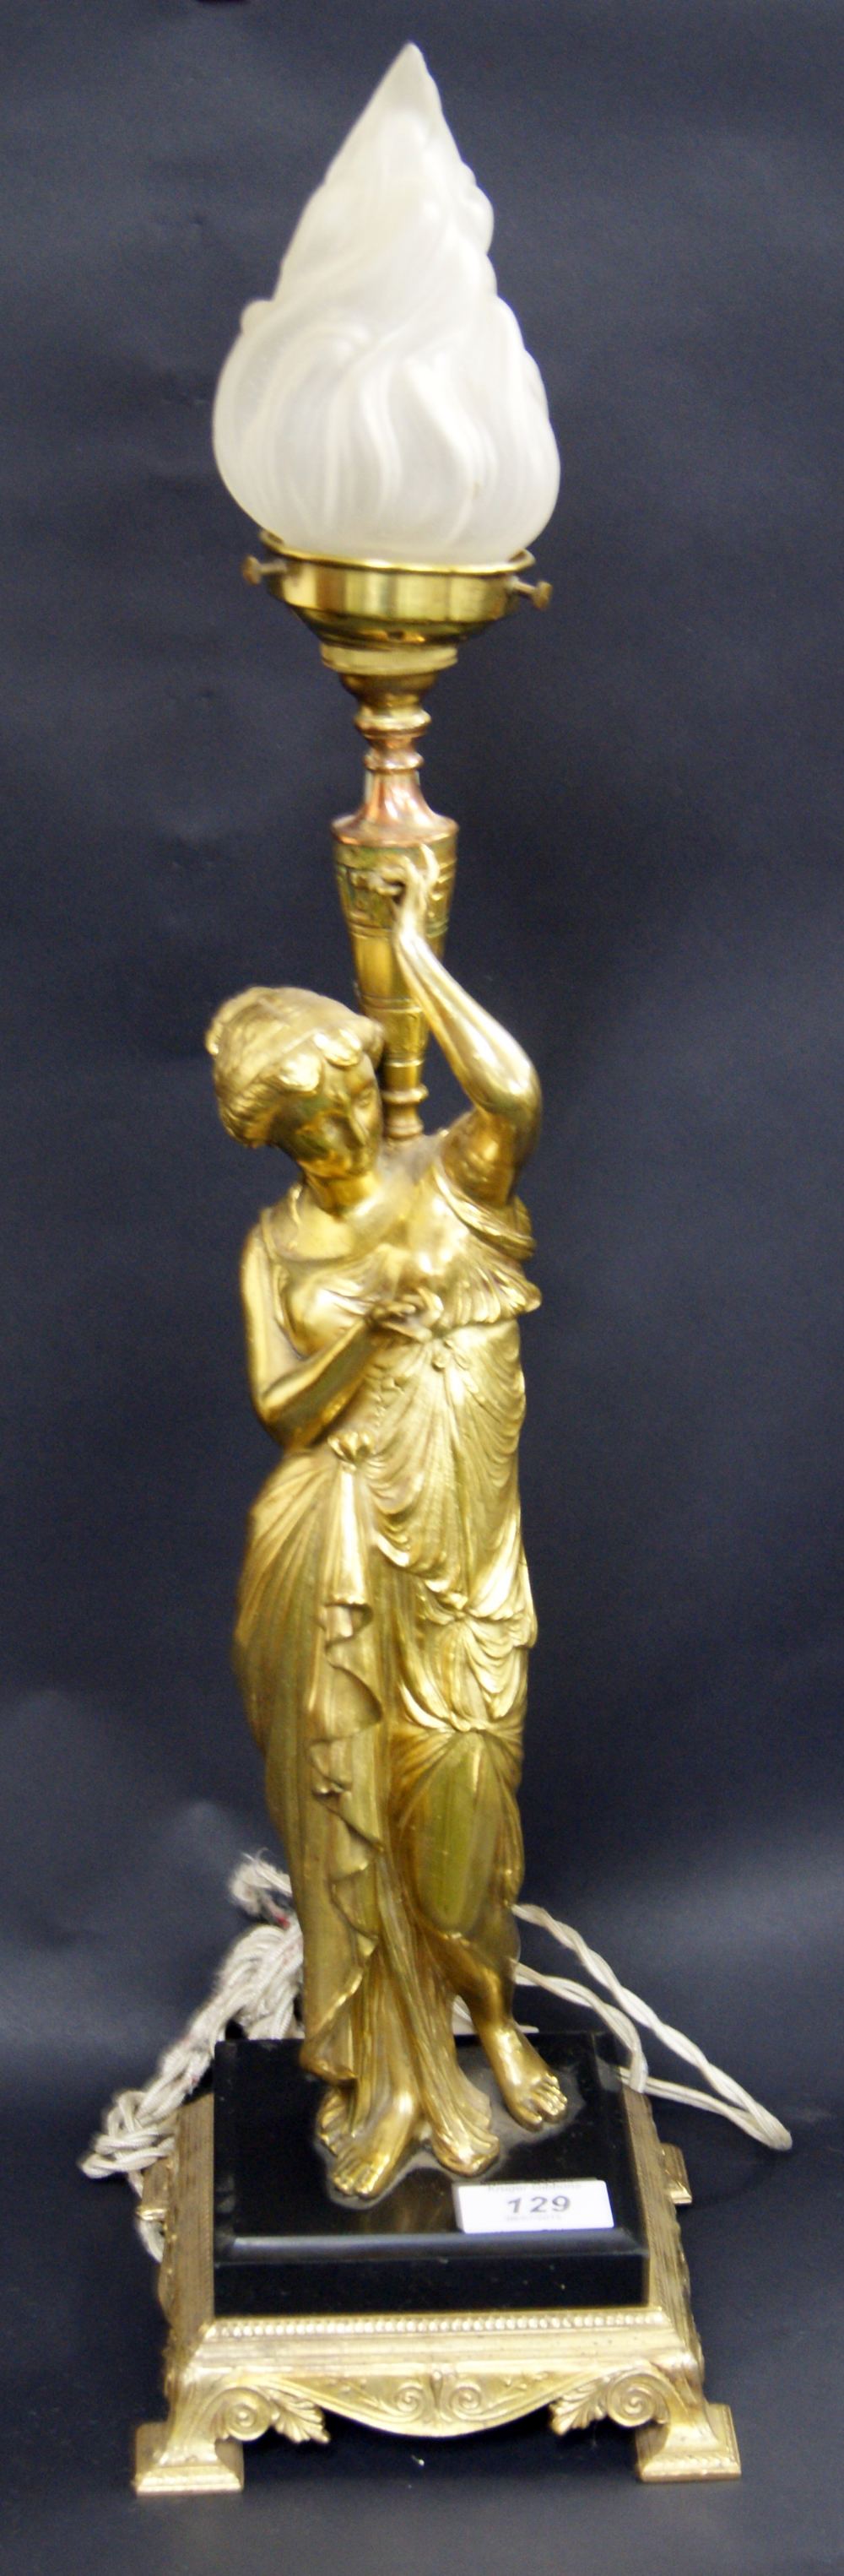 Goutier-style cast figural table lamp (not tested).